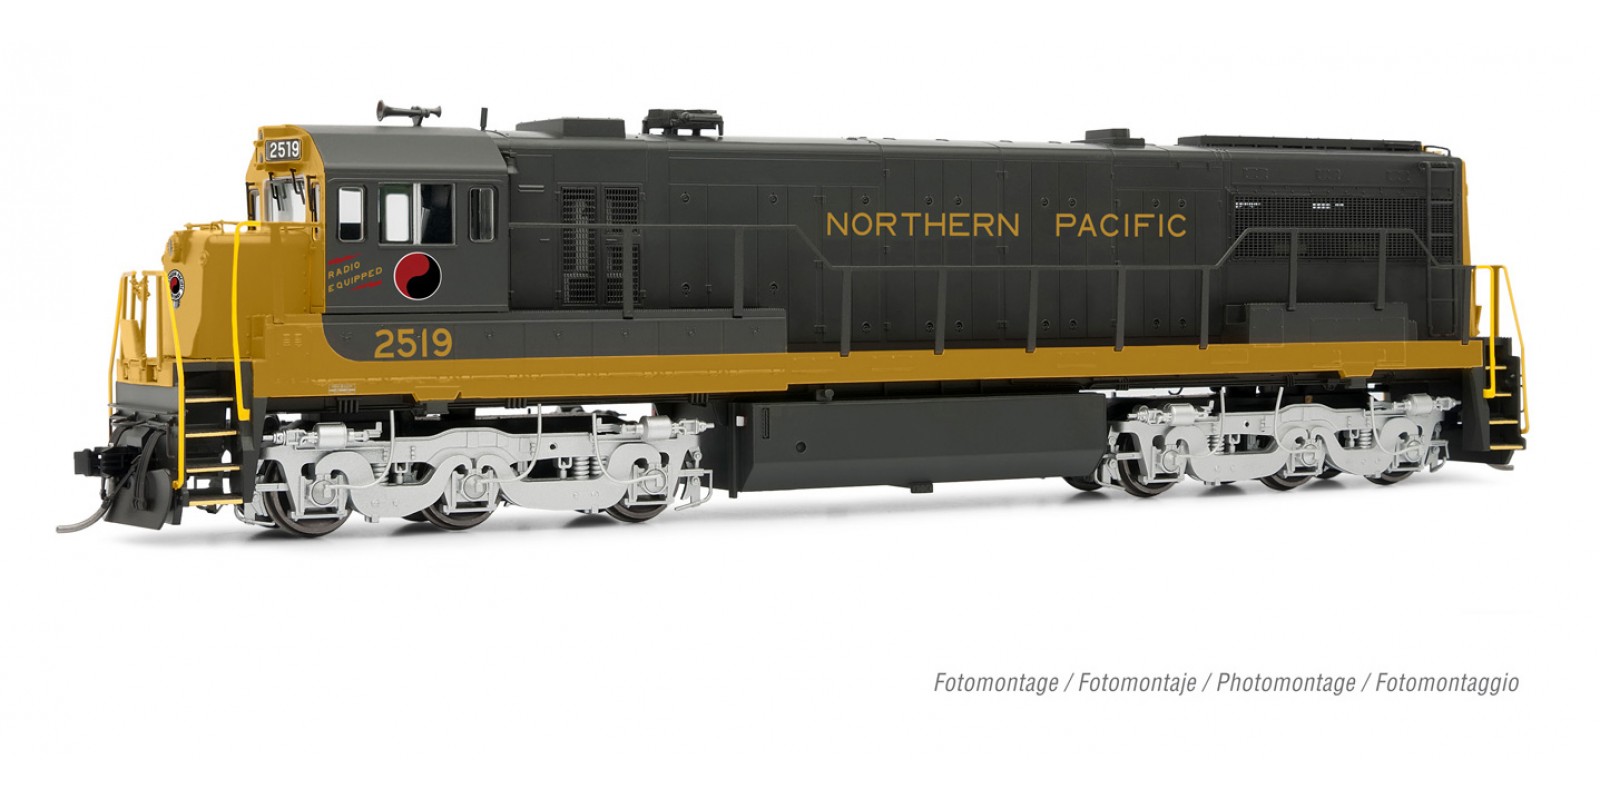 RI2885S Northern Pacific, U25c Phase IIIb Running number #2519, with DCC sound decoder